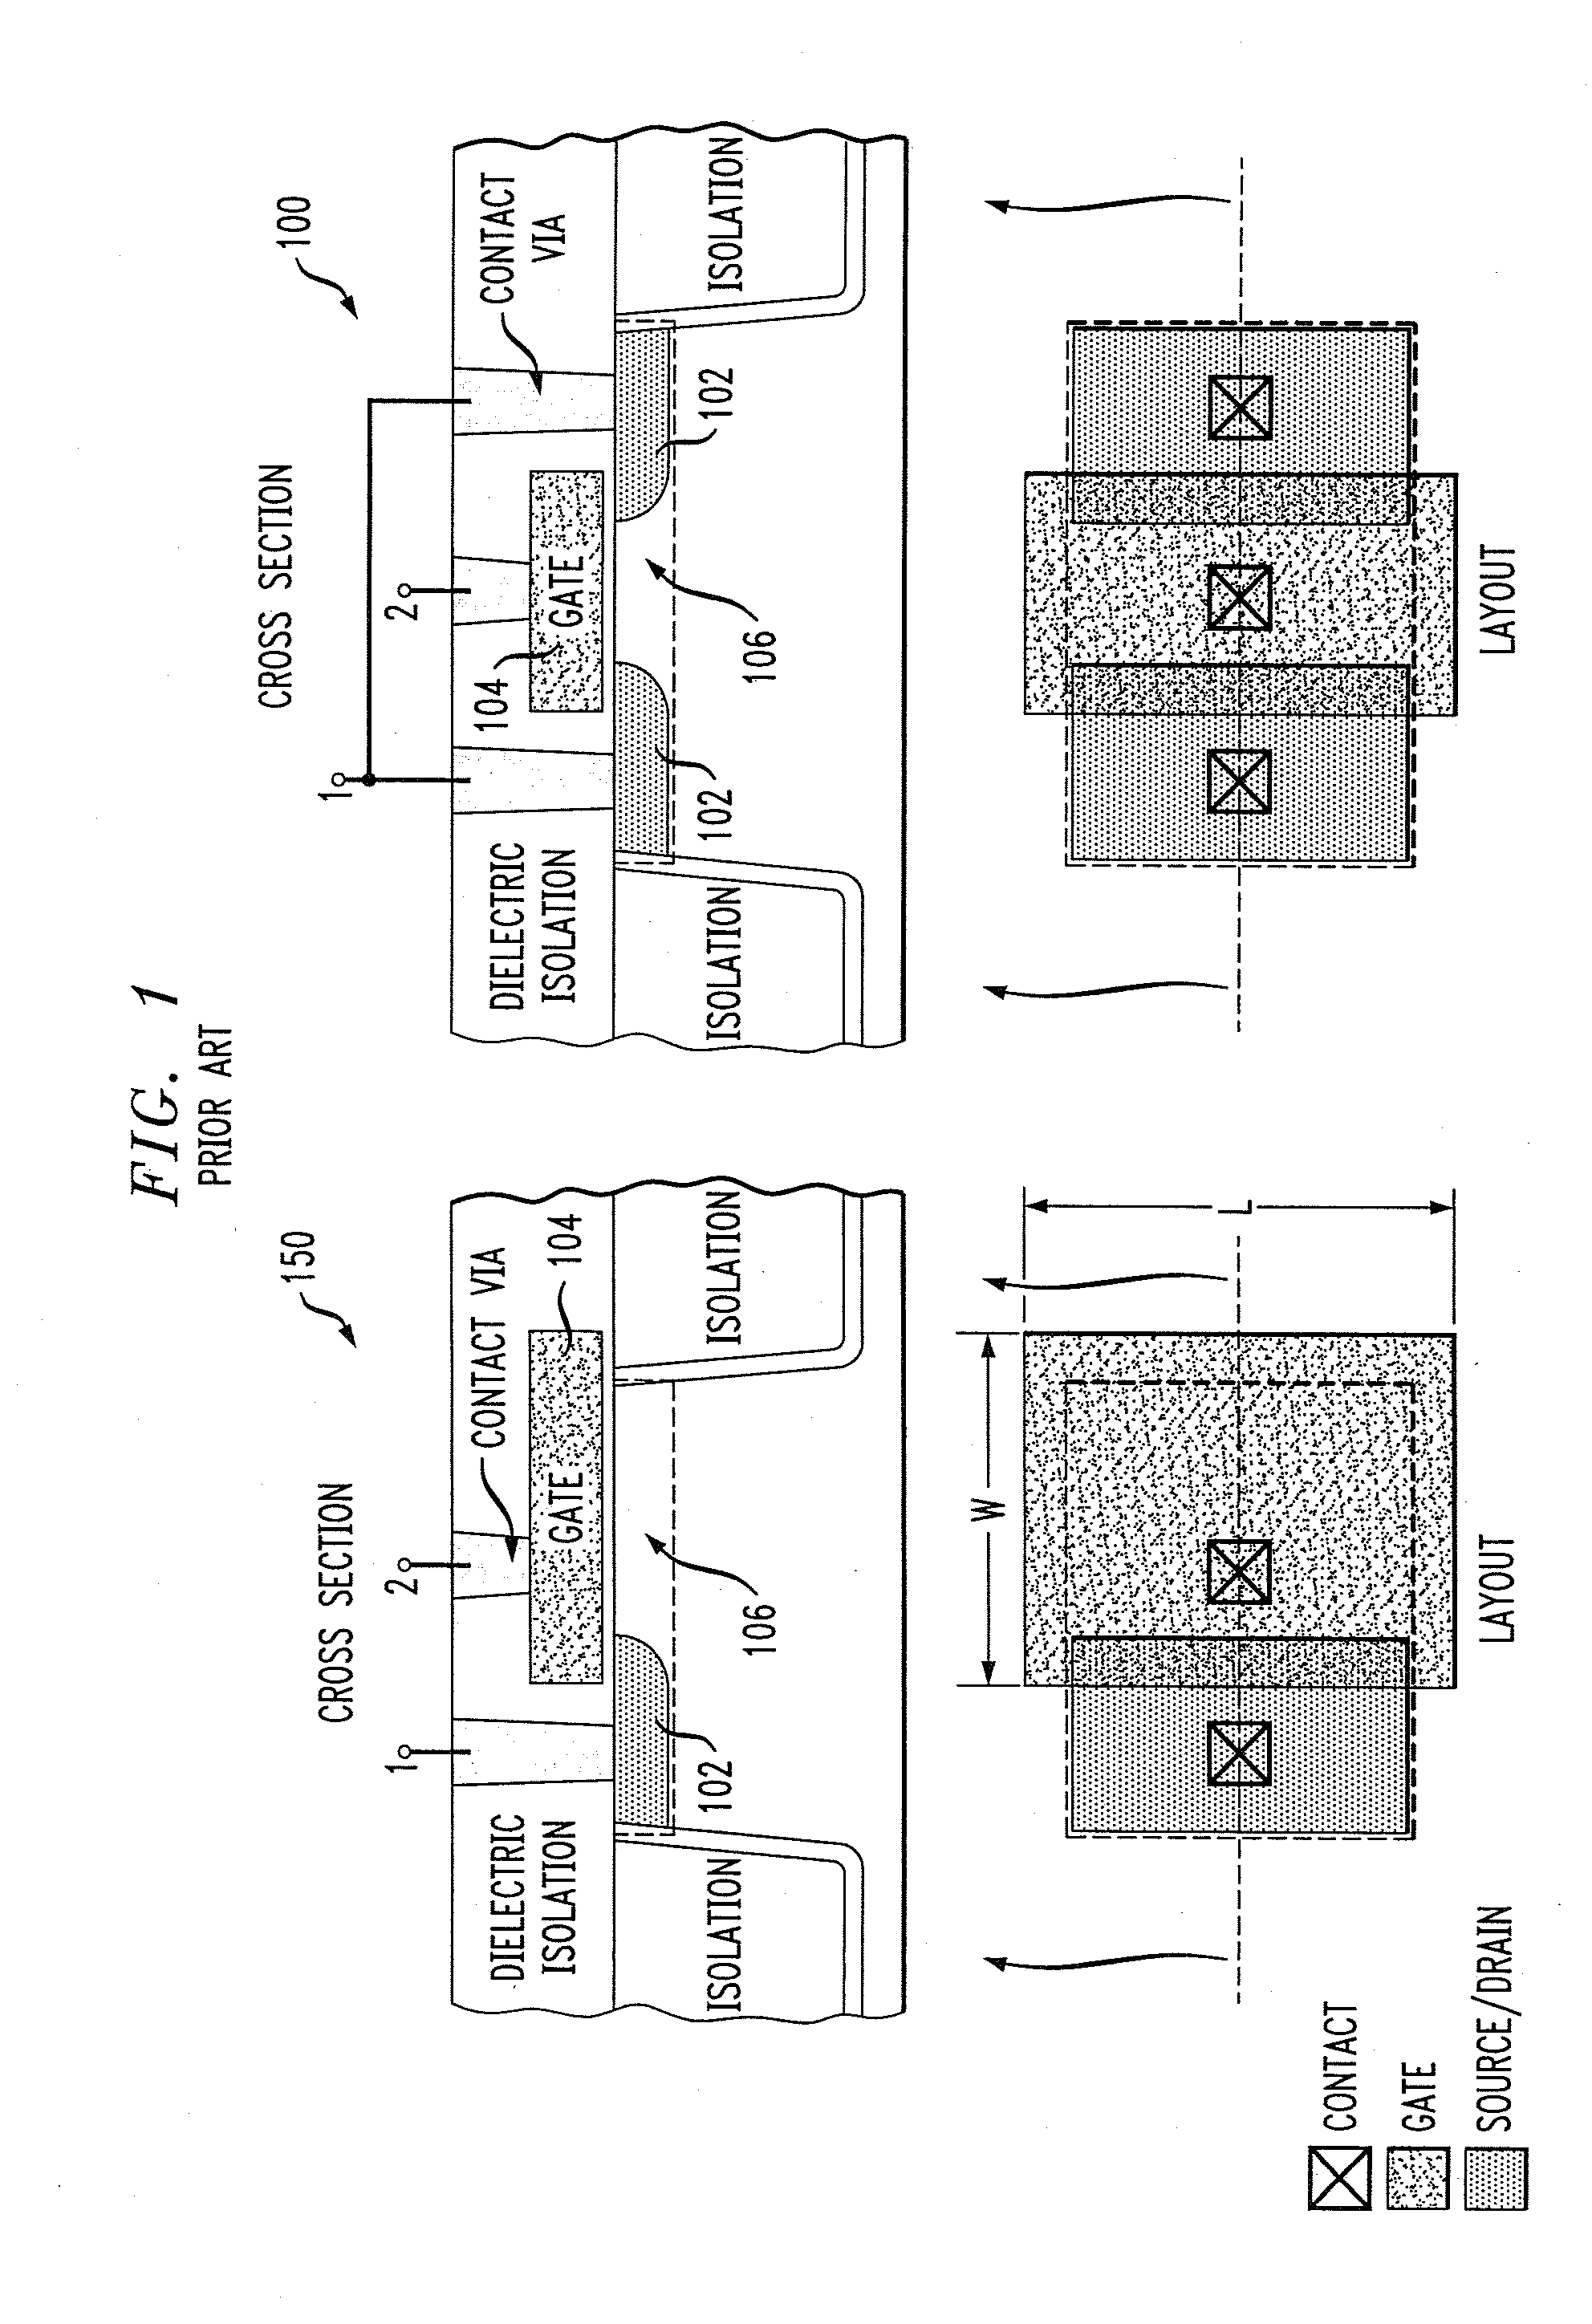 Area-Efficient Gated Diode Structure and Method of Forming Same